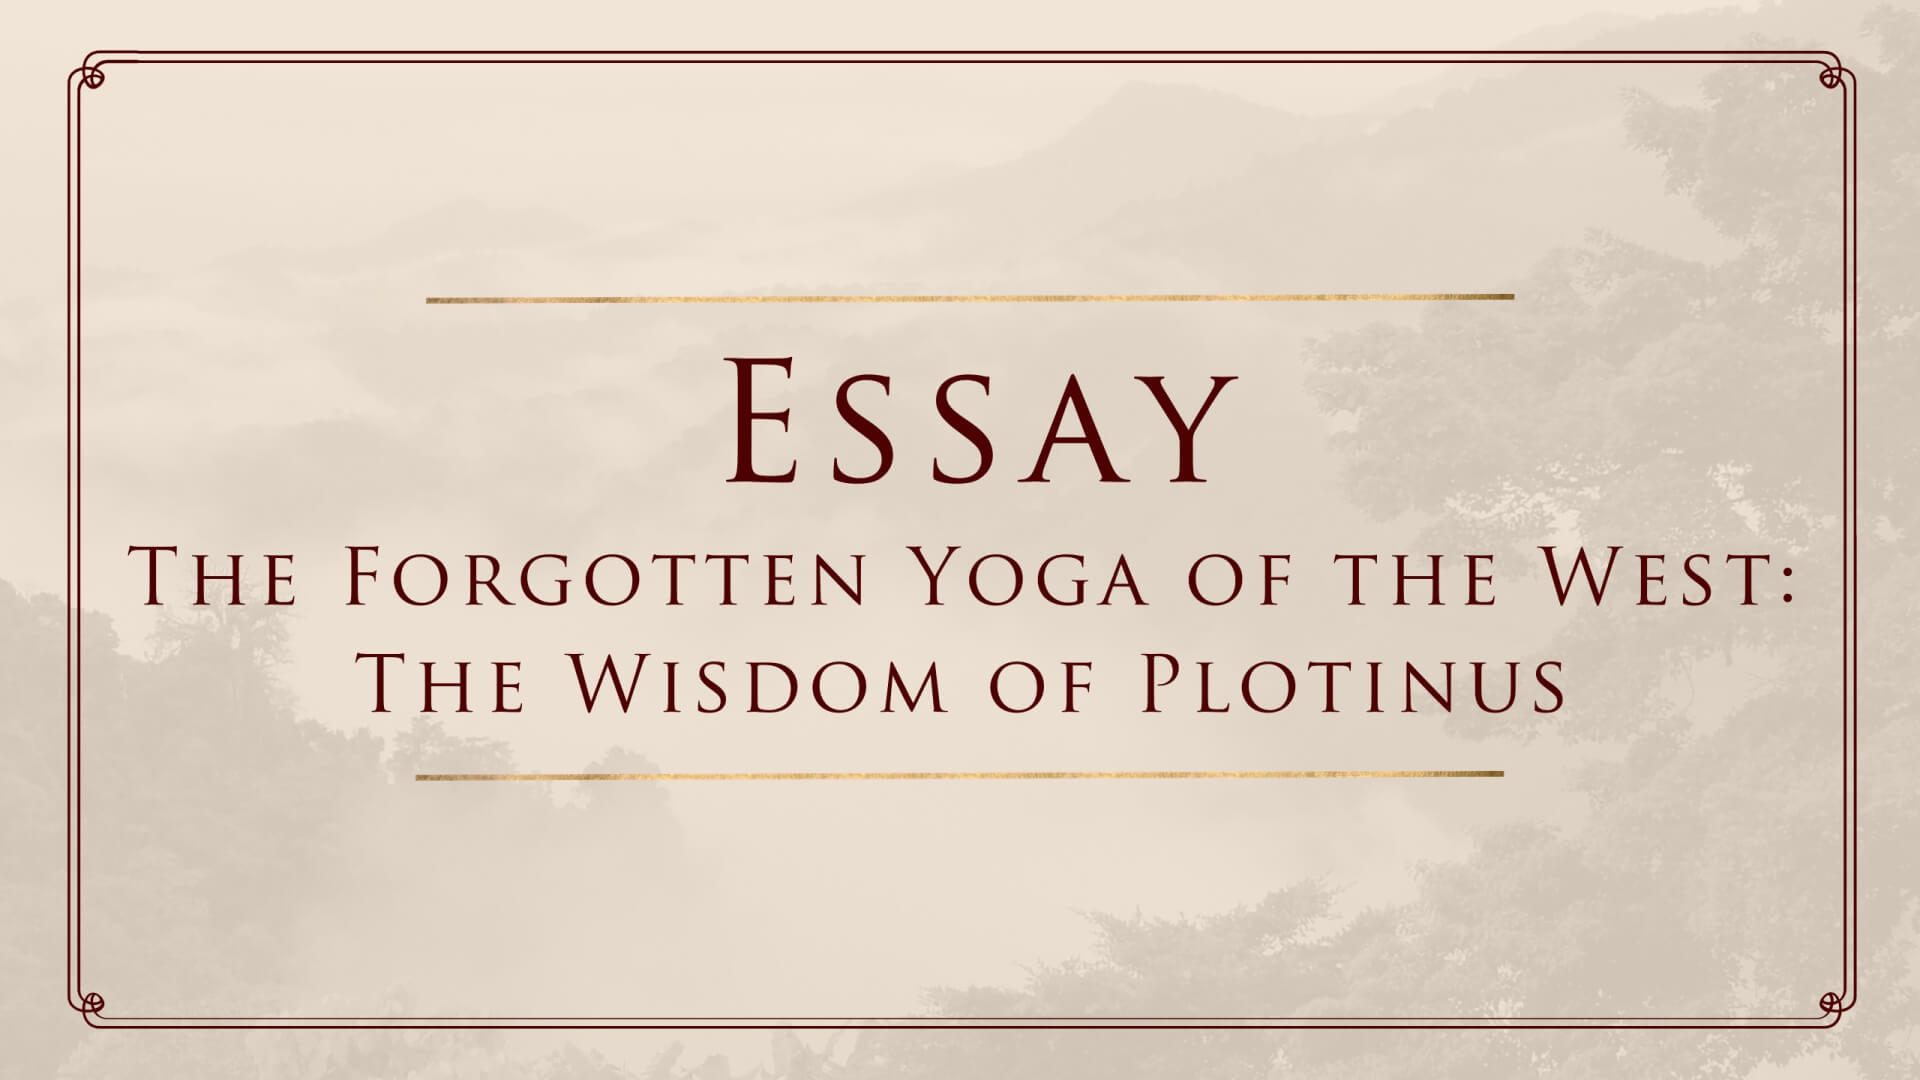 The Forgotten Yoga of the West: The Wisdom of Plotinus